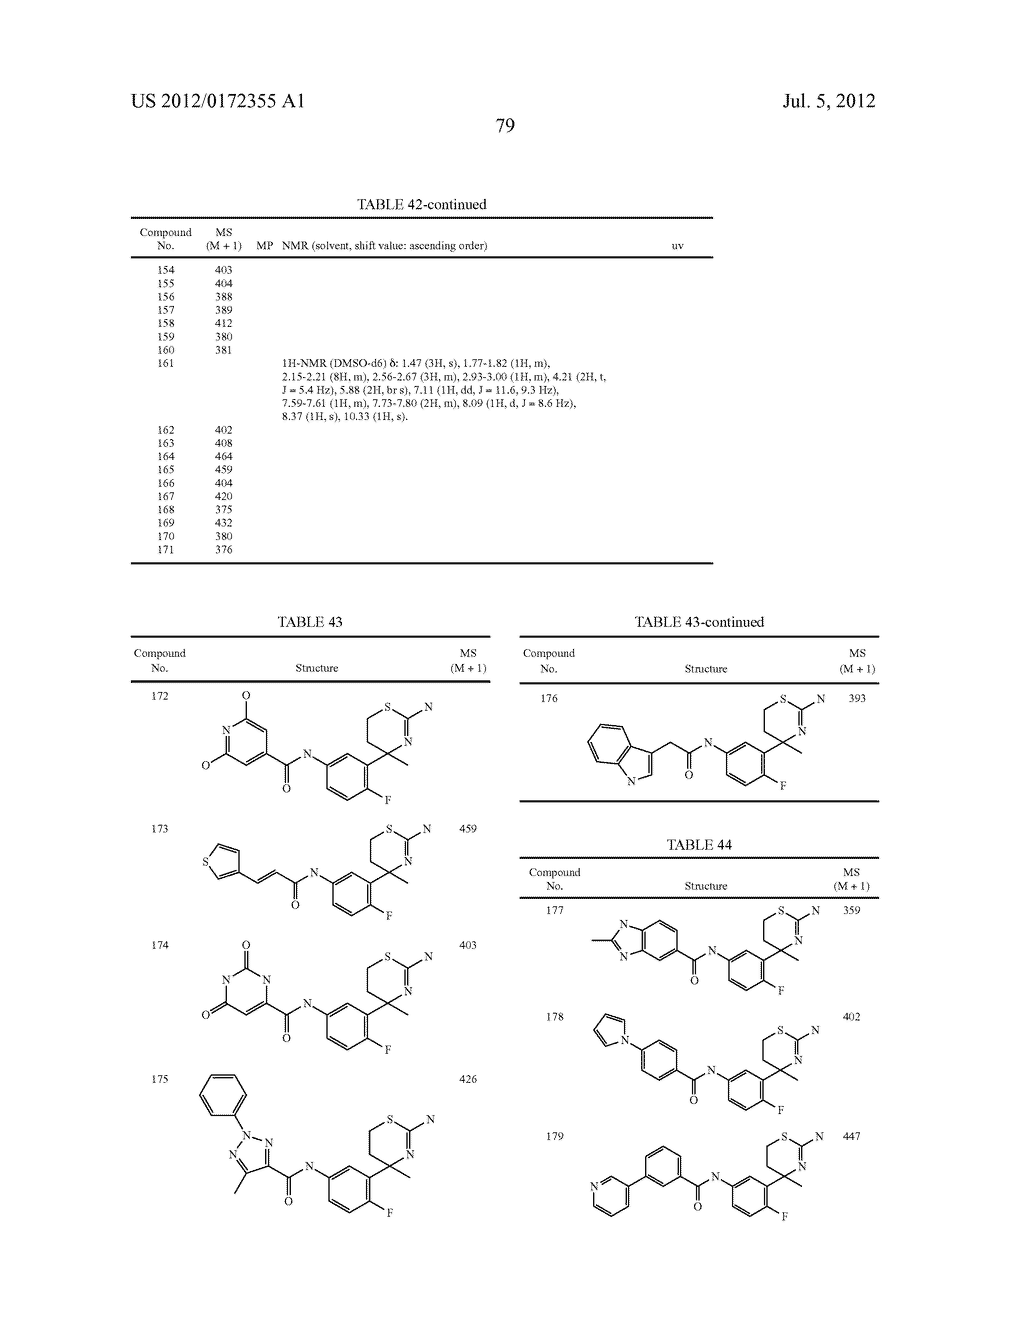 AMINODIHYDROTHIAZINE DERIVATIVES SUBSTITUTED WITH A CYCLIC GROUP - diagram, schematic, and image 80